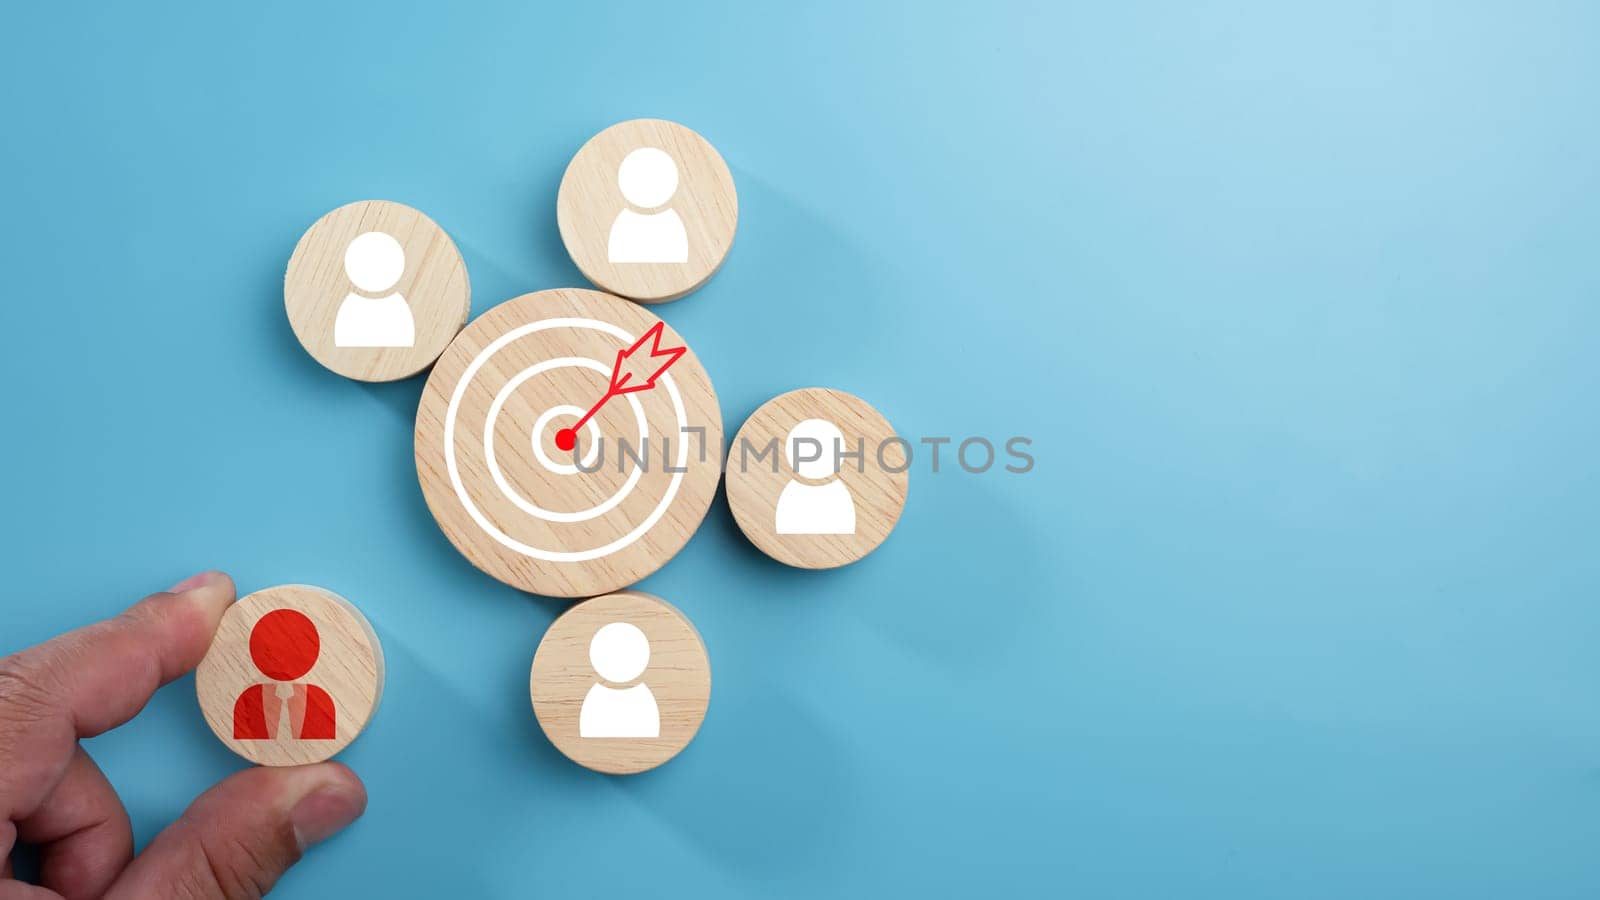 Circular wood with printed target icons and business symbols on light blue background, business goals and objectives concept, business competition, Customer relationship management concept. by Unimages2527